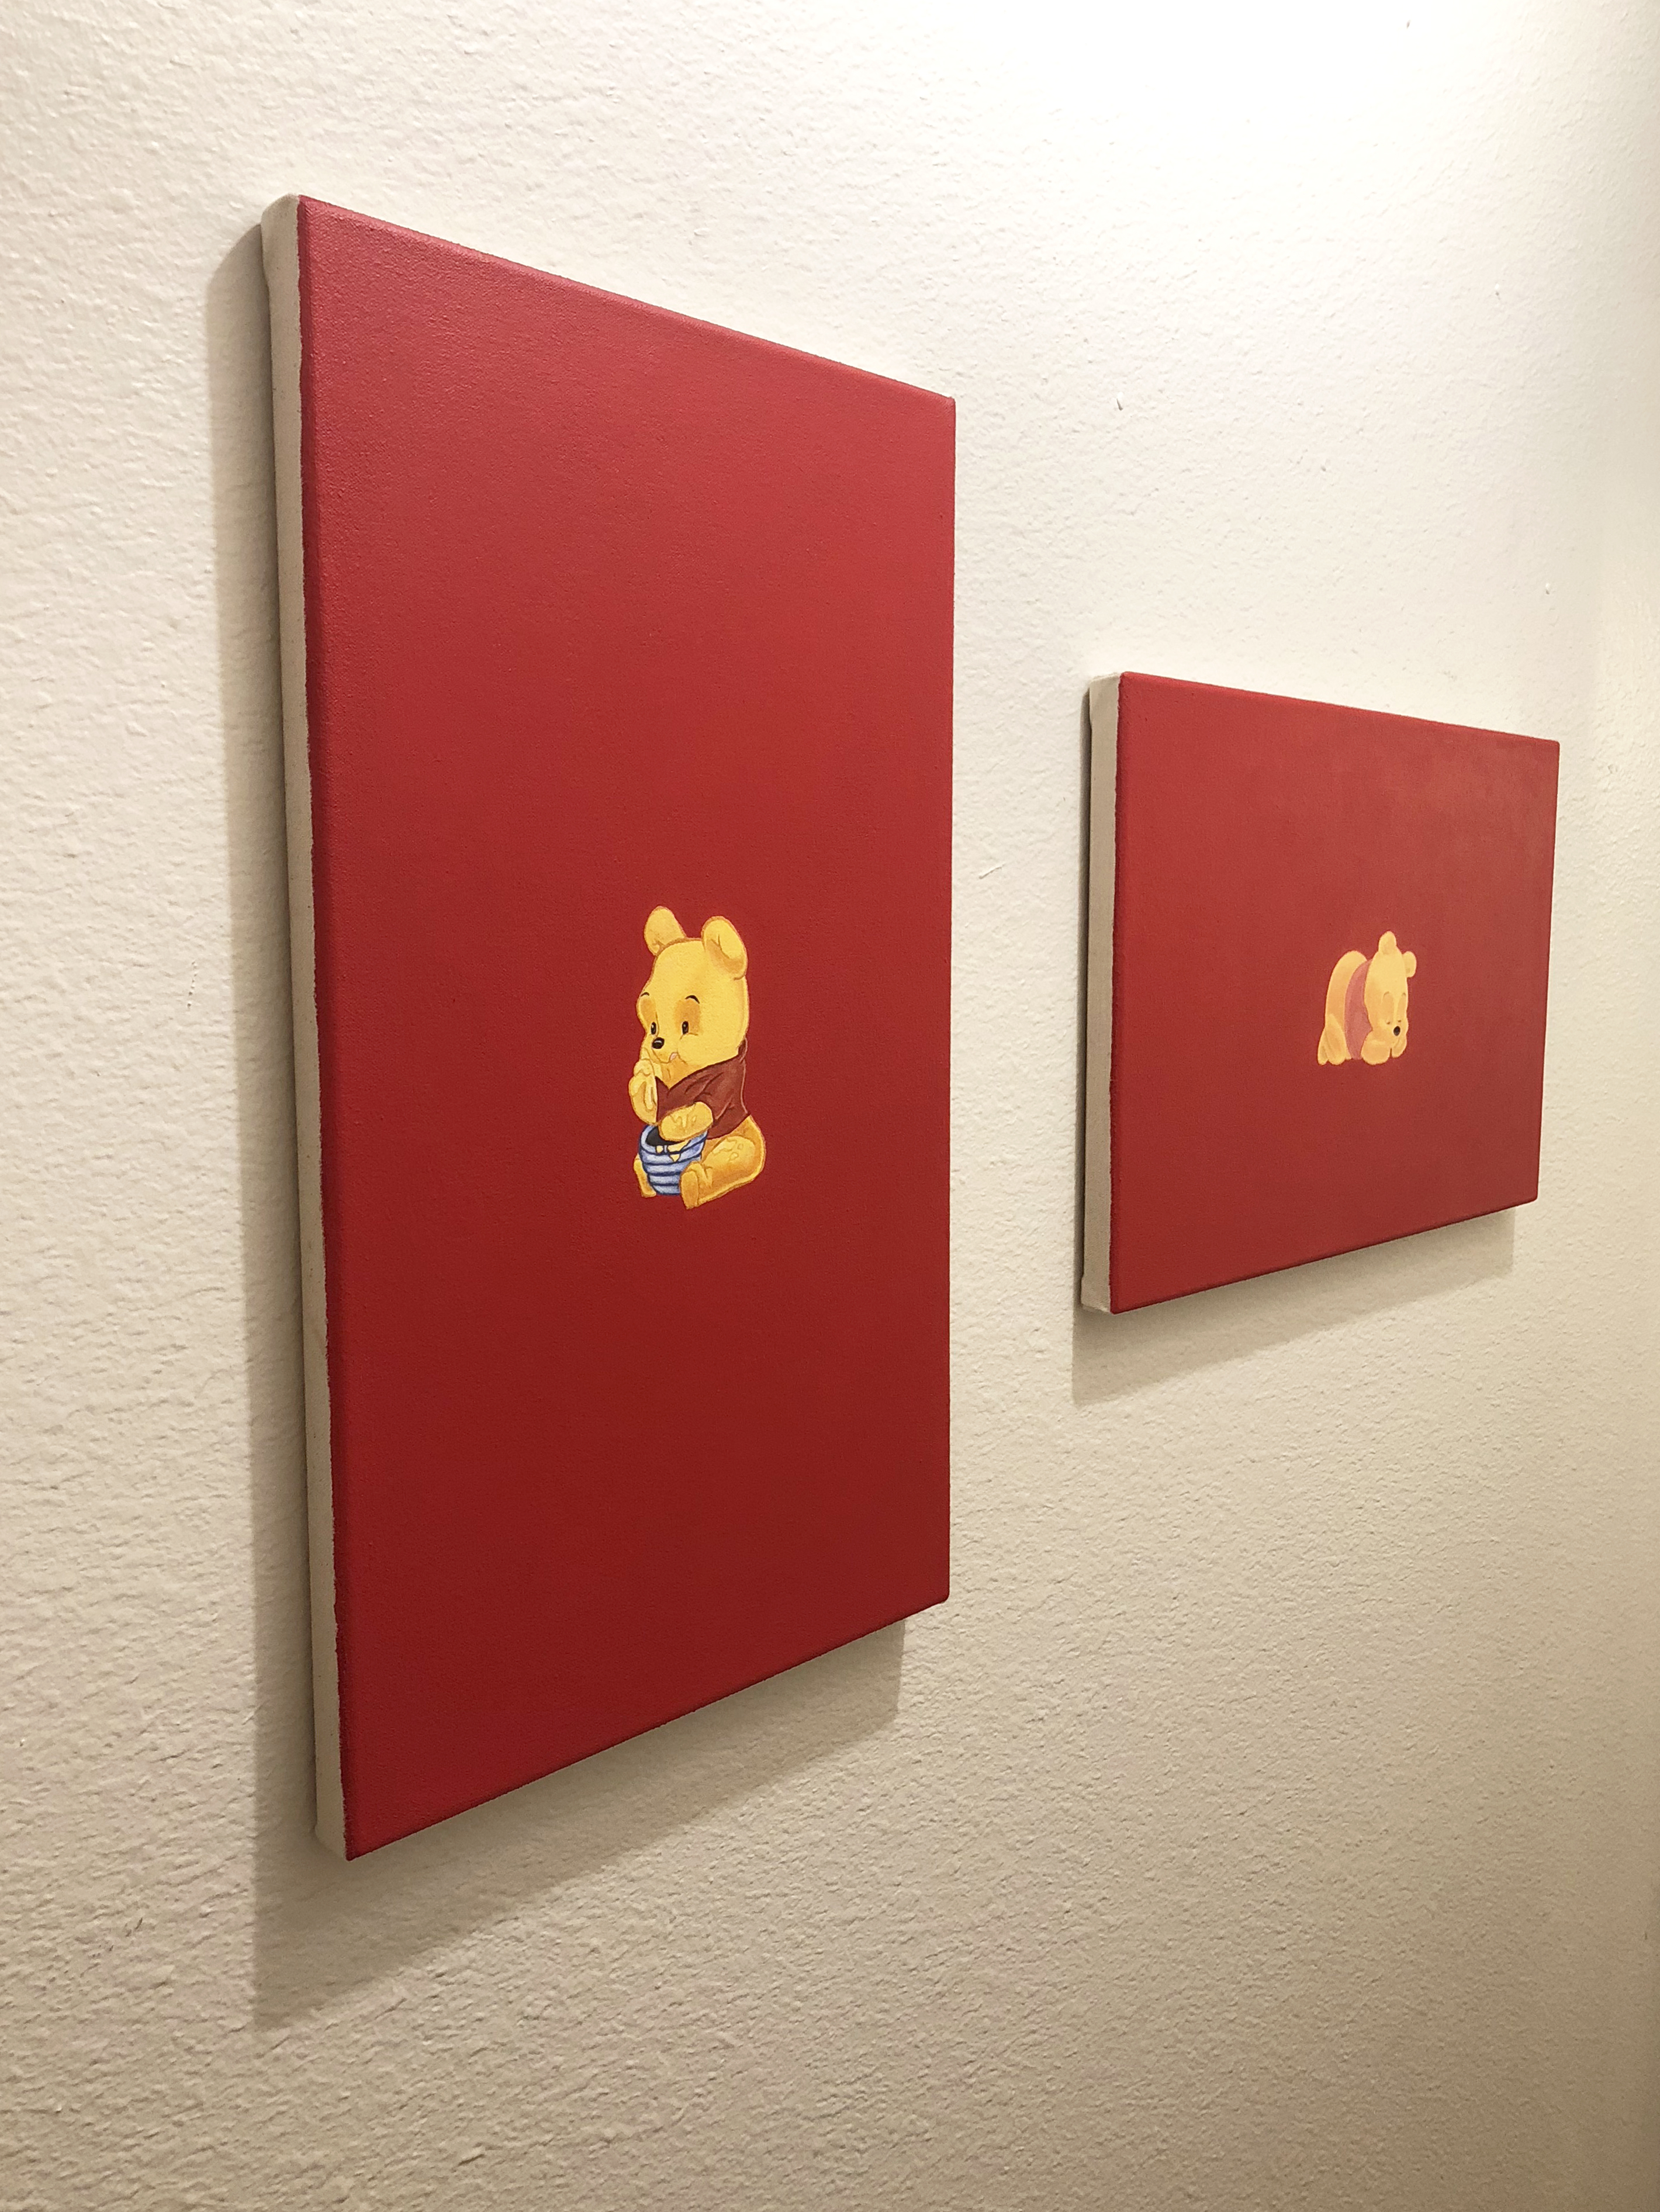 Two paitings of winnie the pooh on a red background hung on a white wall